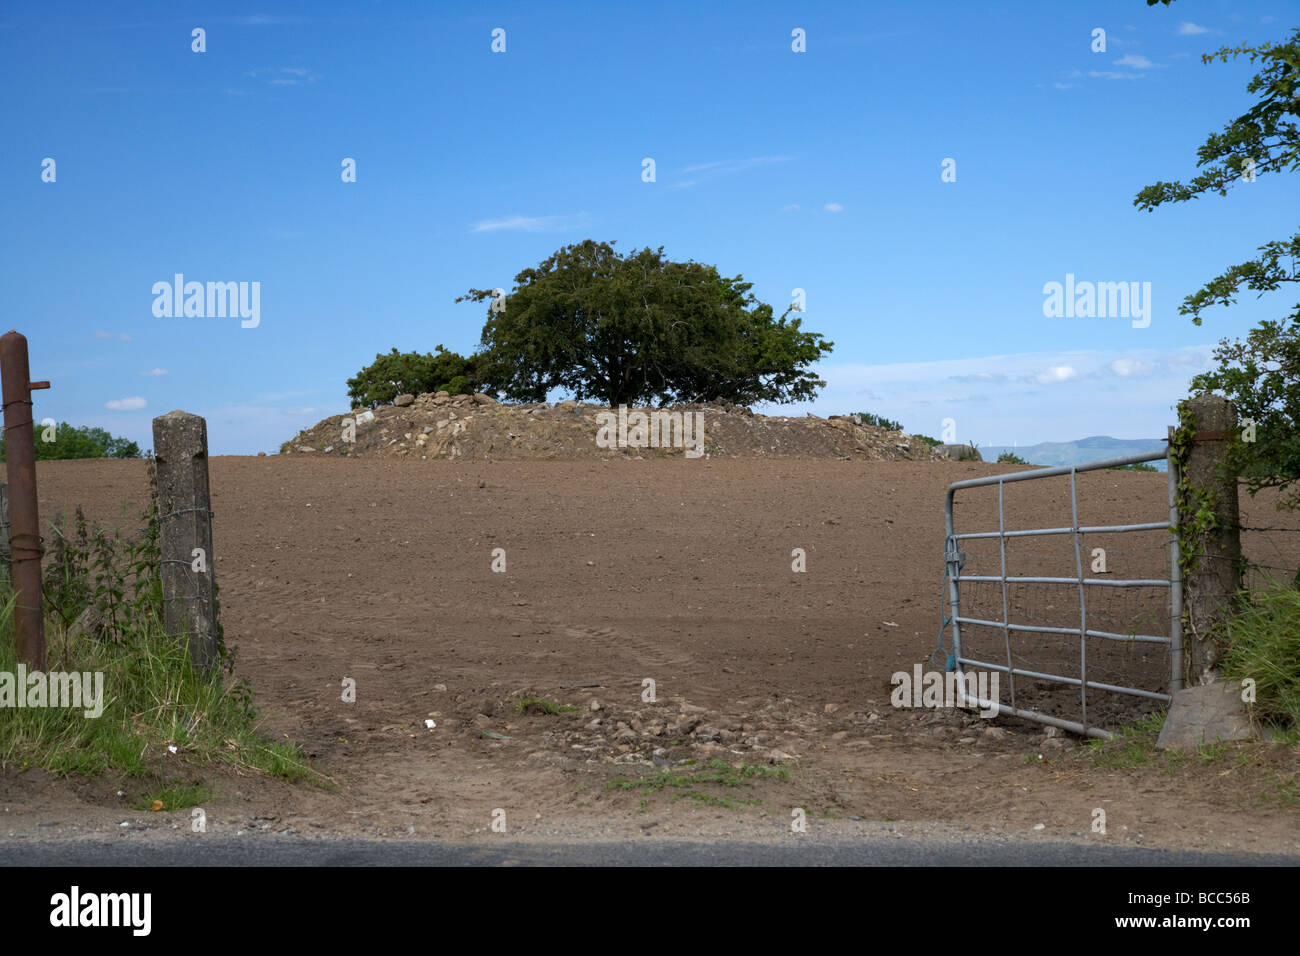 fairy tree in the middle of a ploughed field in county derry ireland Stock Photo